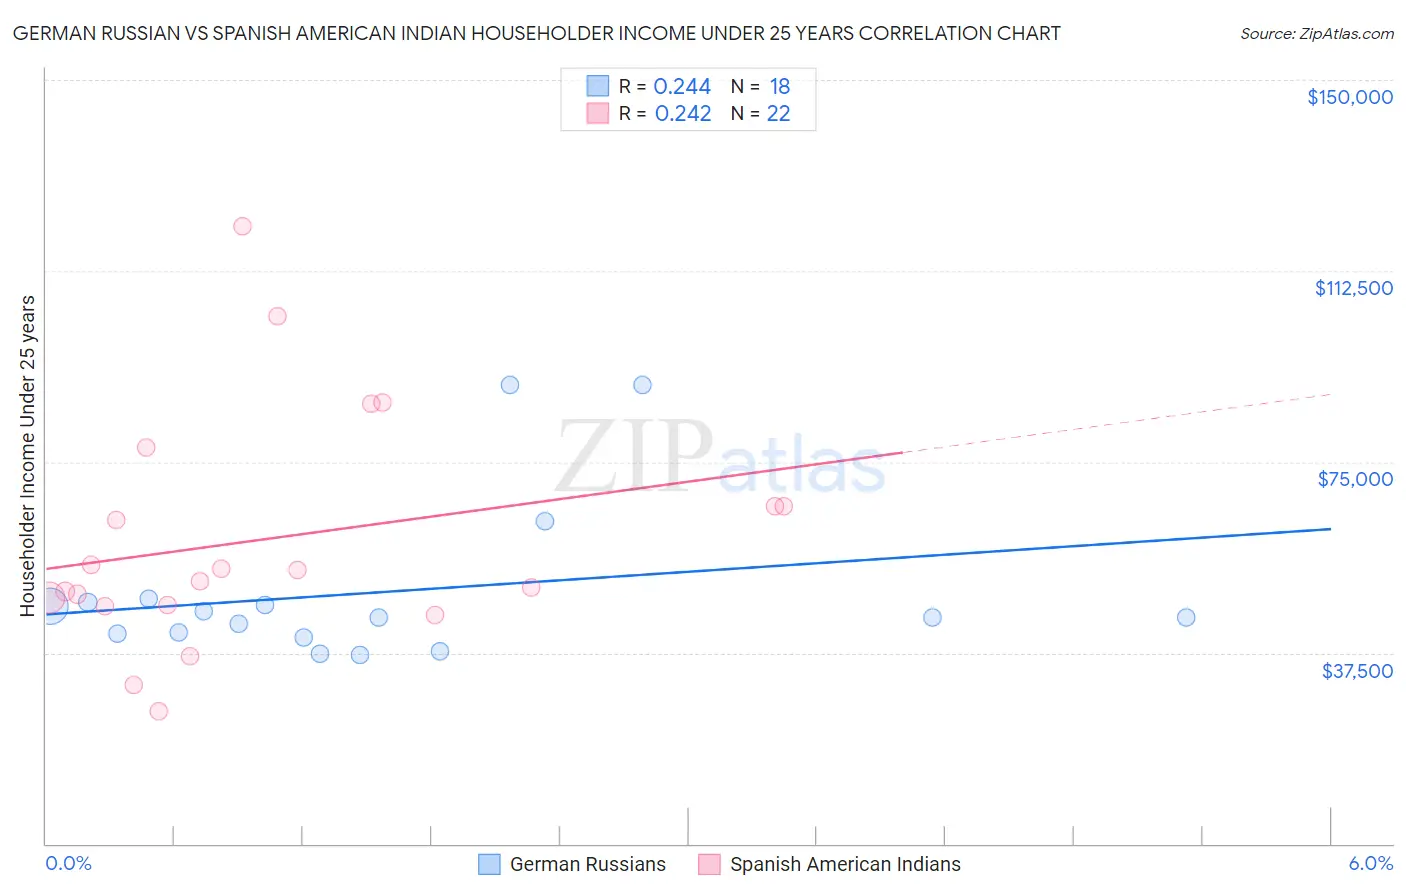 German Russian vs Spanish American Indian Householder Income Under 25 years